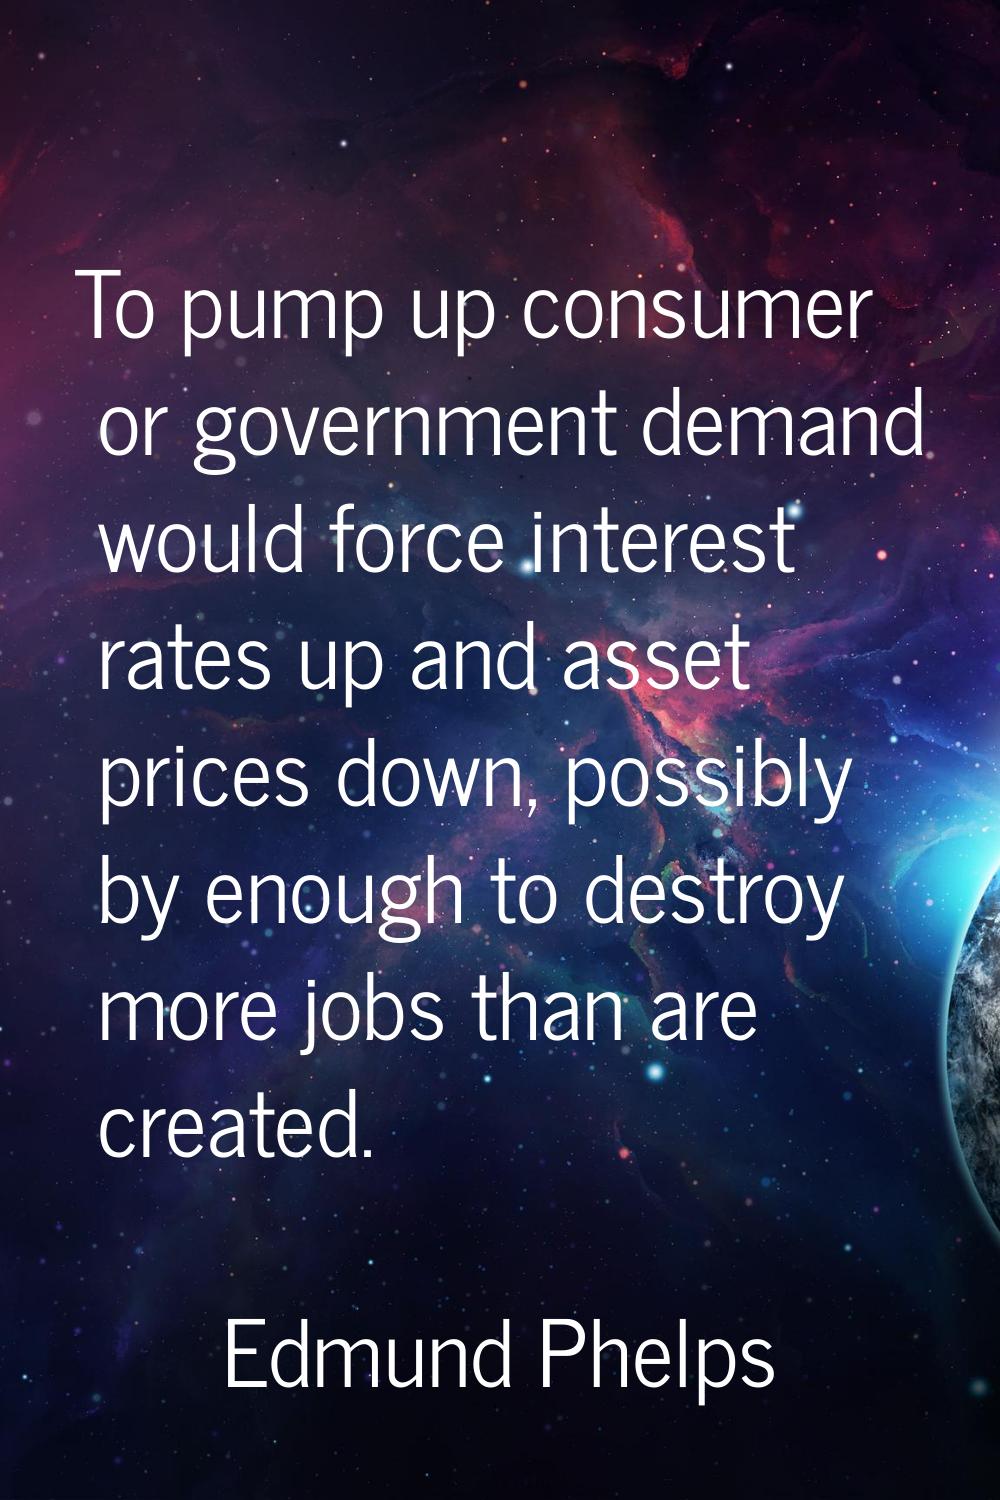 To pump up consumer or government demand would force interest rates up and asset prices down, possi